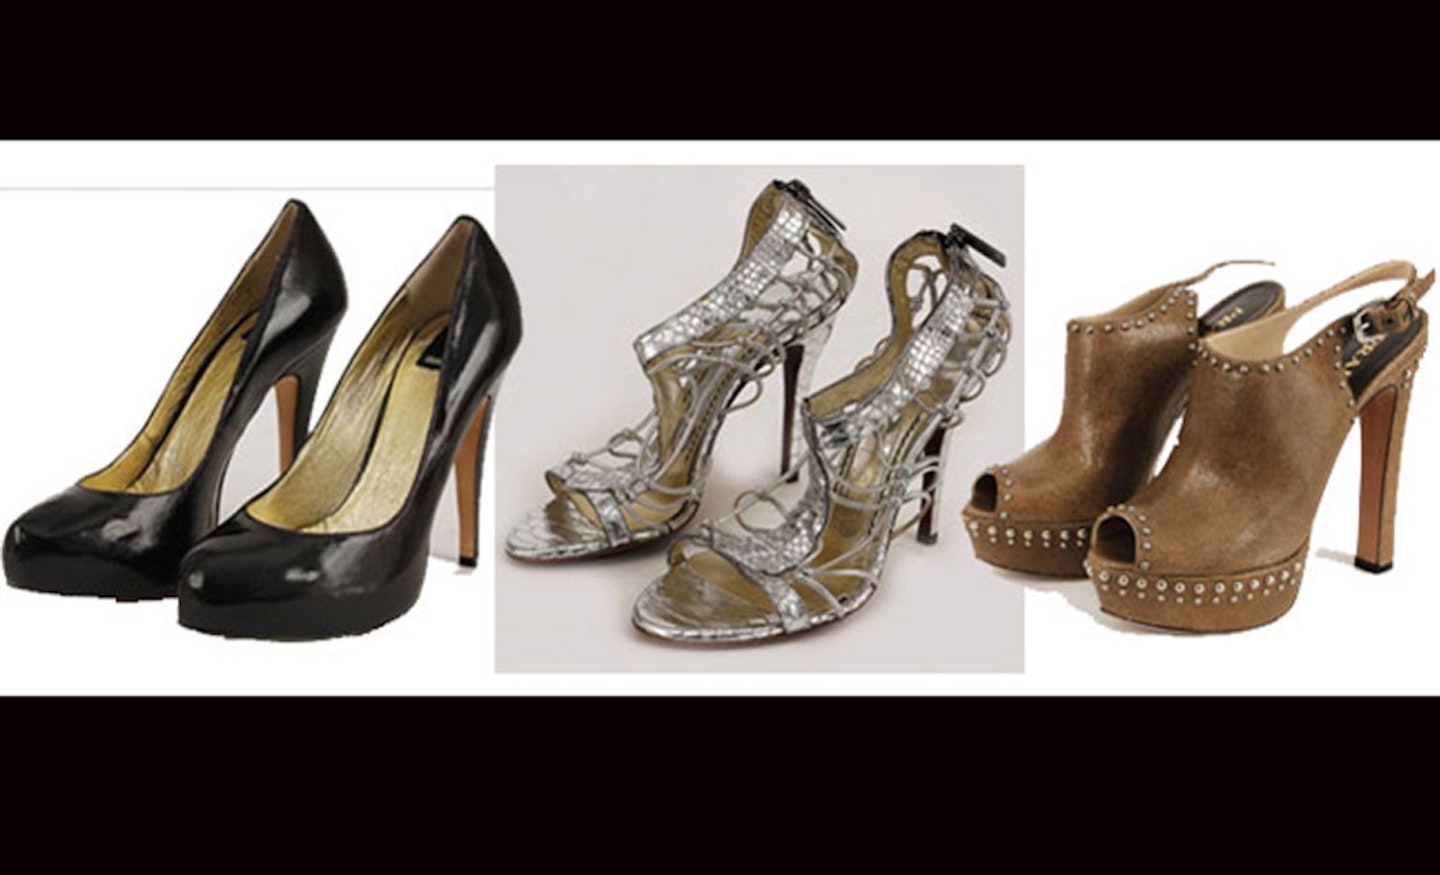 Dolce Vita, Jonathan Kelsey and Prada heels donated by SJP for the auction